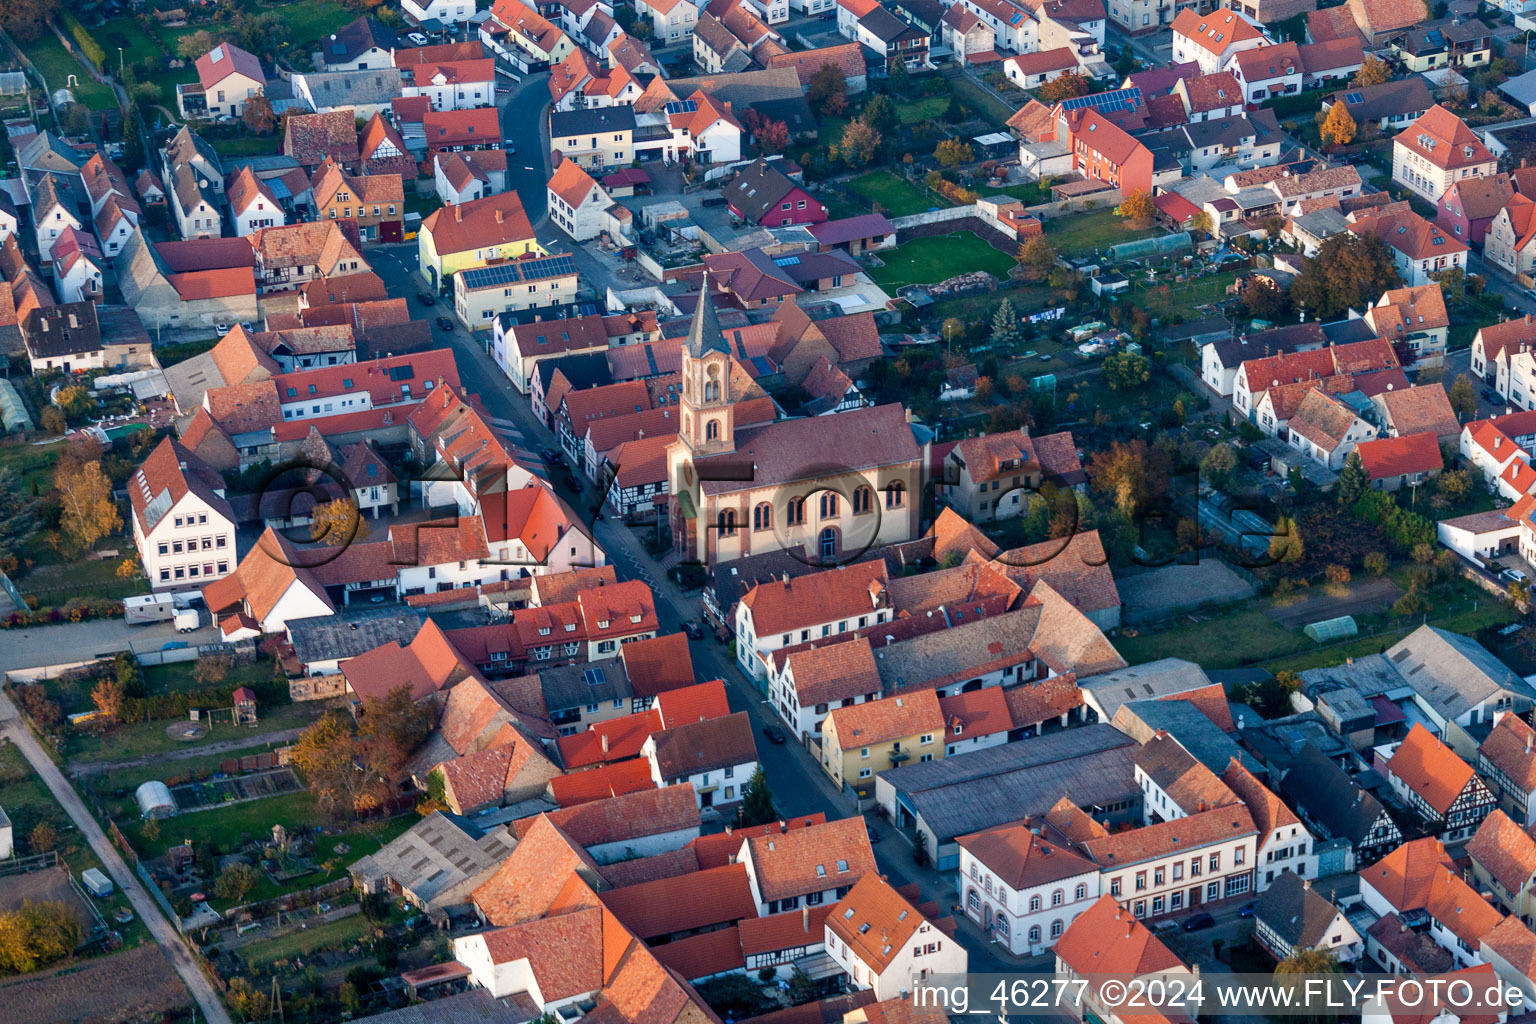 Aerial view of Church building Protestantische Kirche Zeiskam in Zeiskam in the state Rhineland-Palatinate, Germany